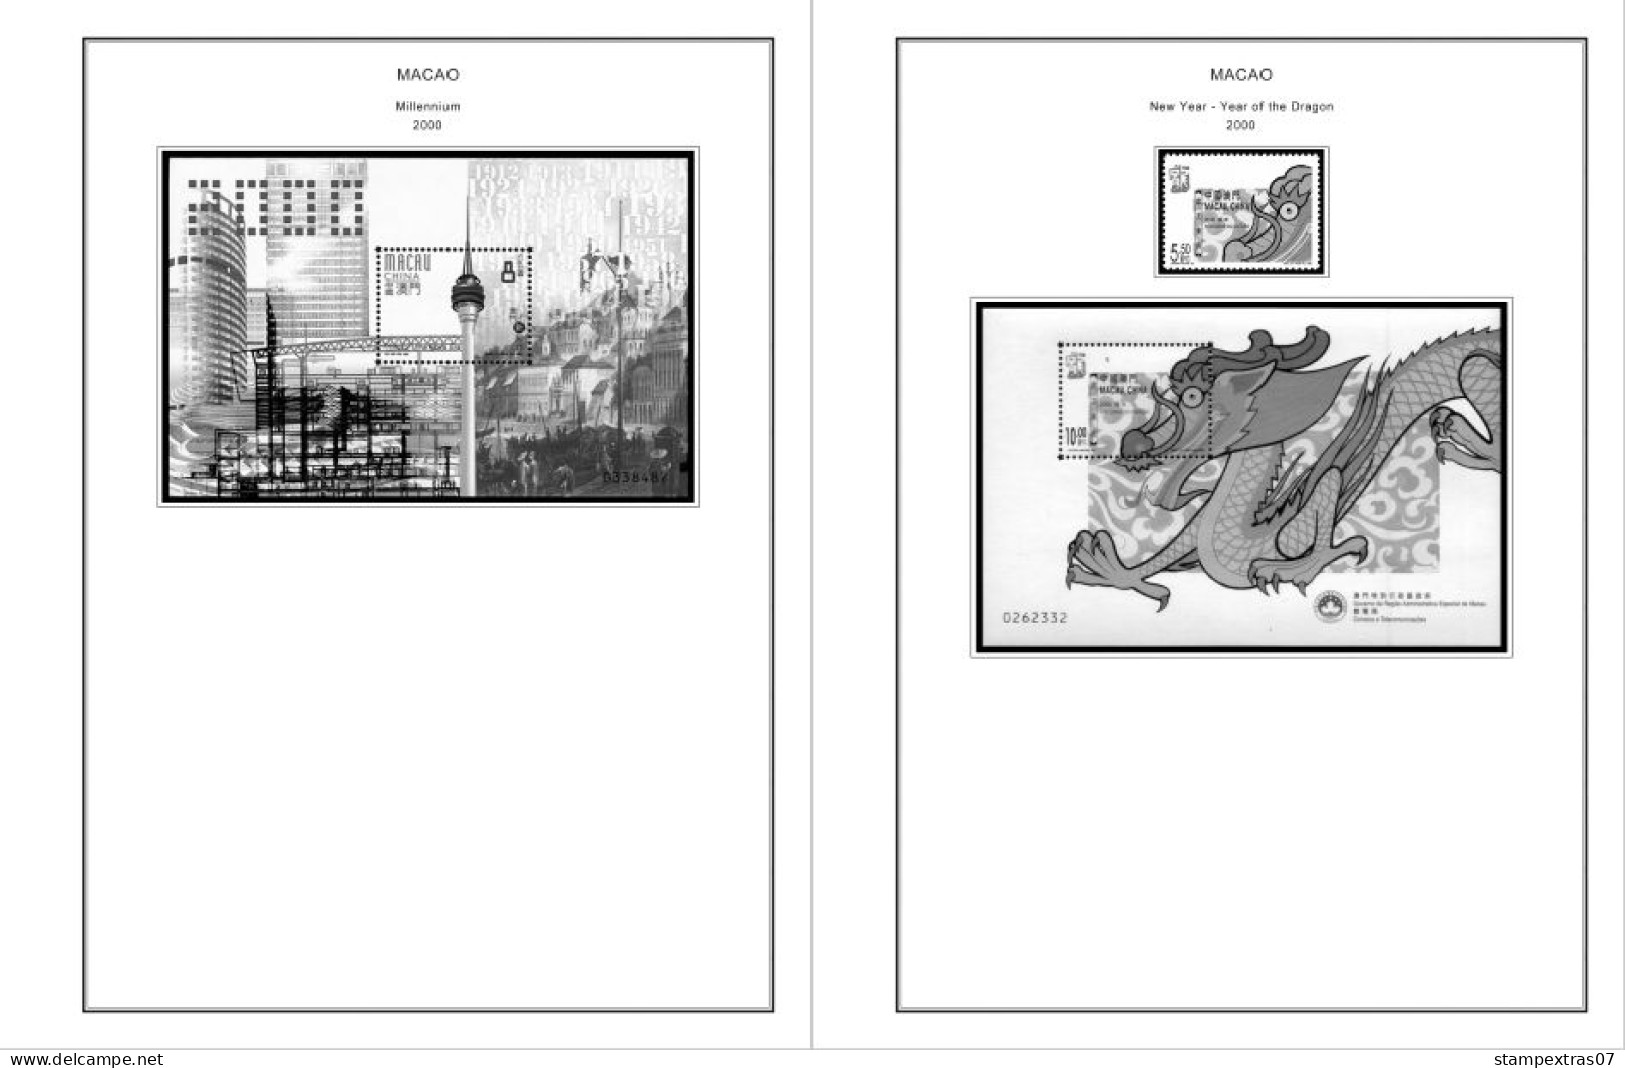 MACAO [SAR] 1999-2010 + 2011-2020 STAMP ALBUM PAGES (248 B&w Illustrated Pages) - Englisch